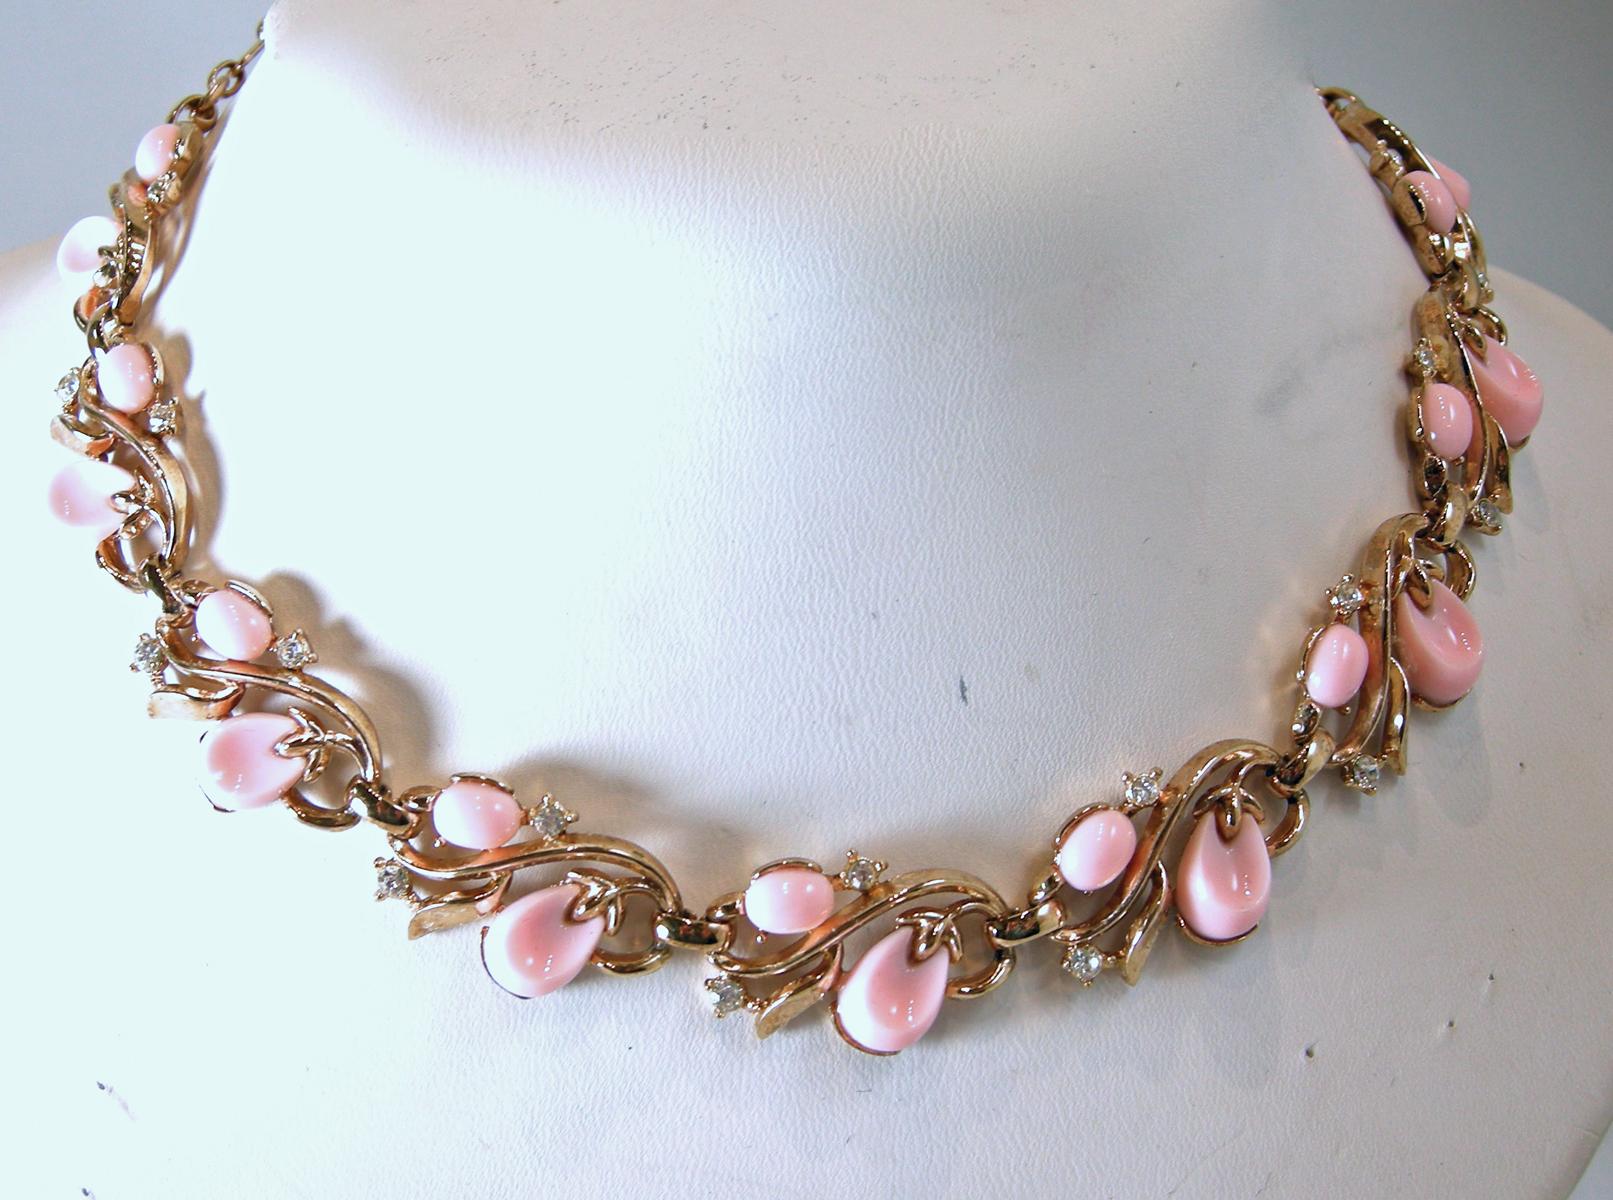 This vintage signed Trifari set has the necklace, bracelet and earrings with pink stones and clear crystal accents in a gold tone setting.  The necklace measures 15-1/2” x 5/8” with a hook clasp.  The matching bracelet is 7” x 5/8” with a fold-over